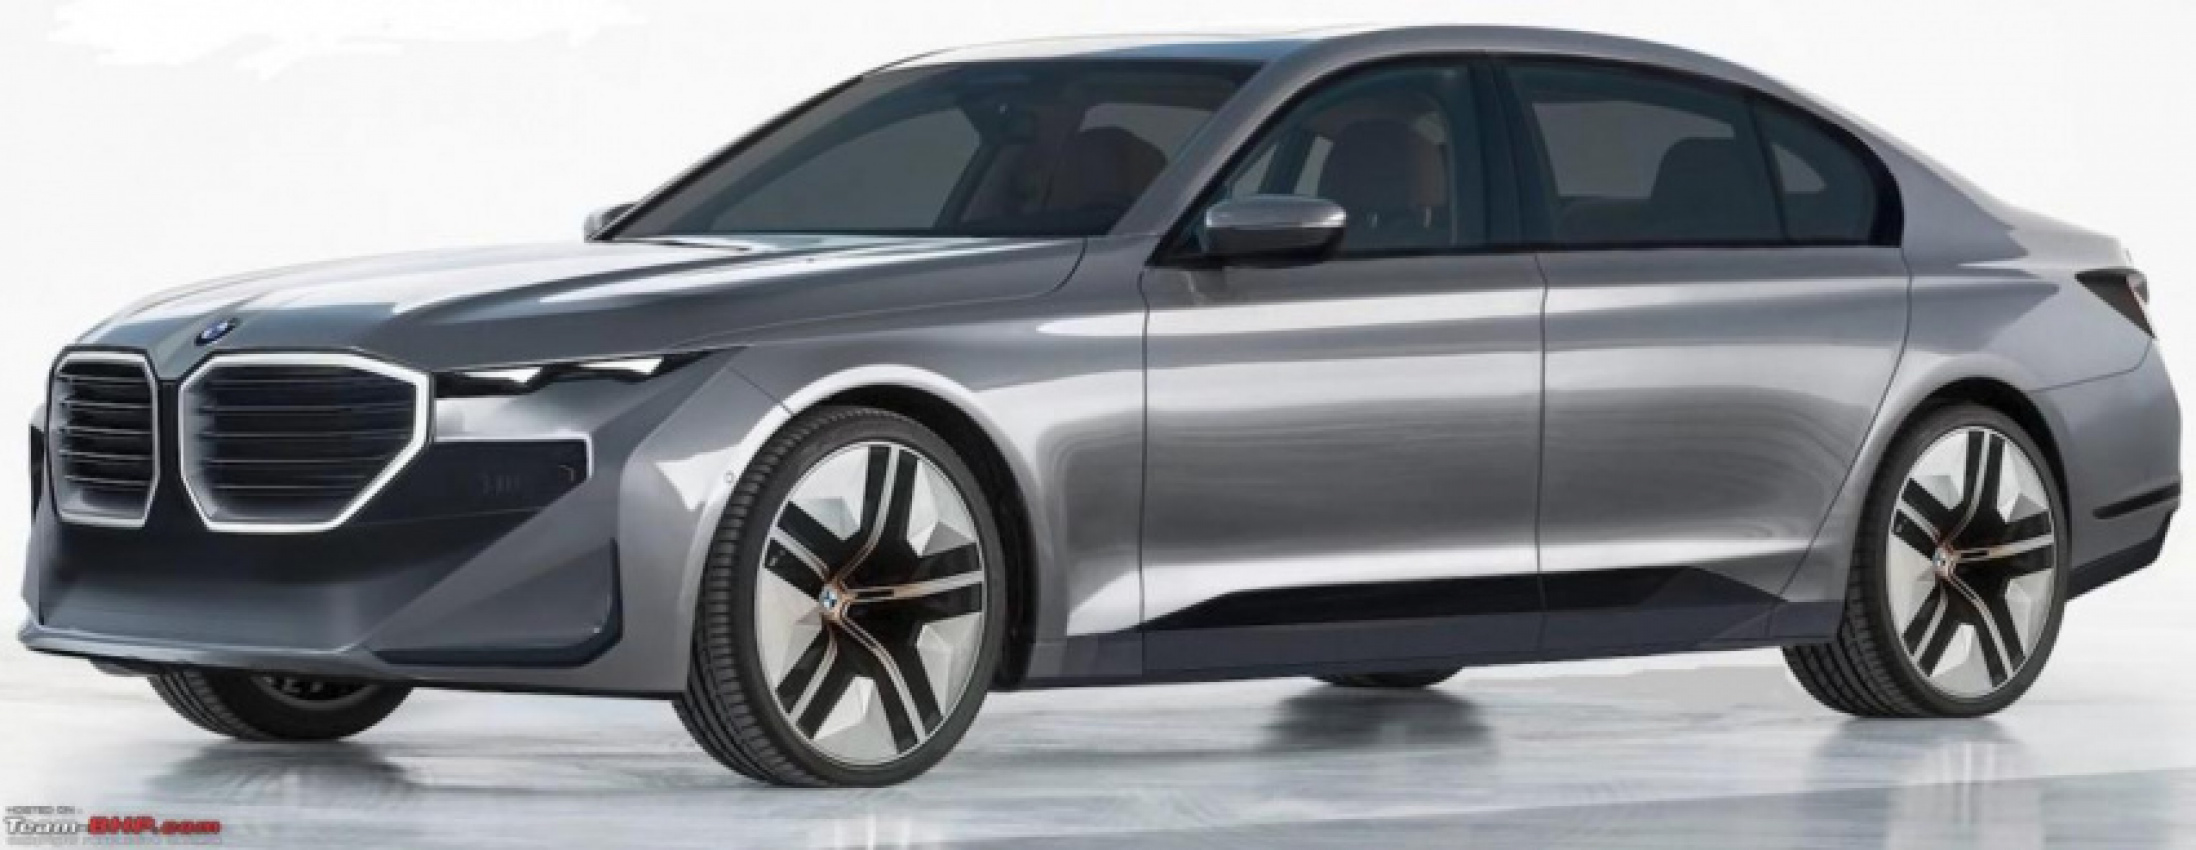 autos, bmw, cars, 7 series, design, indian, international, member content, bmw's horrendously oversized new grille designs & the next-gen 7 series